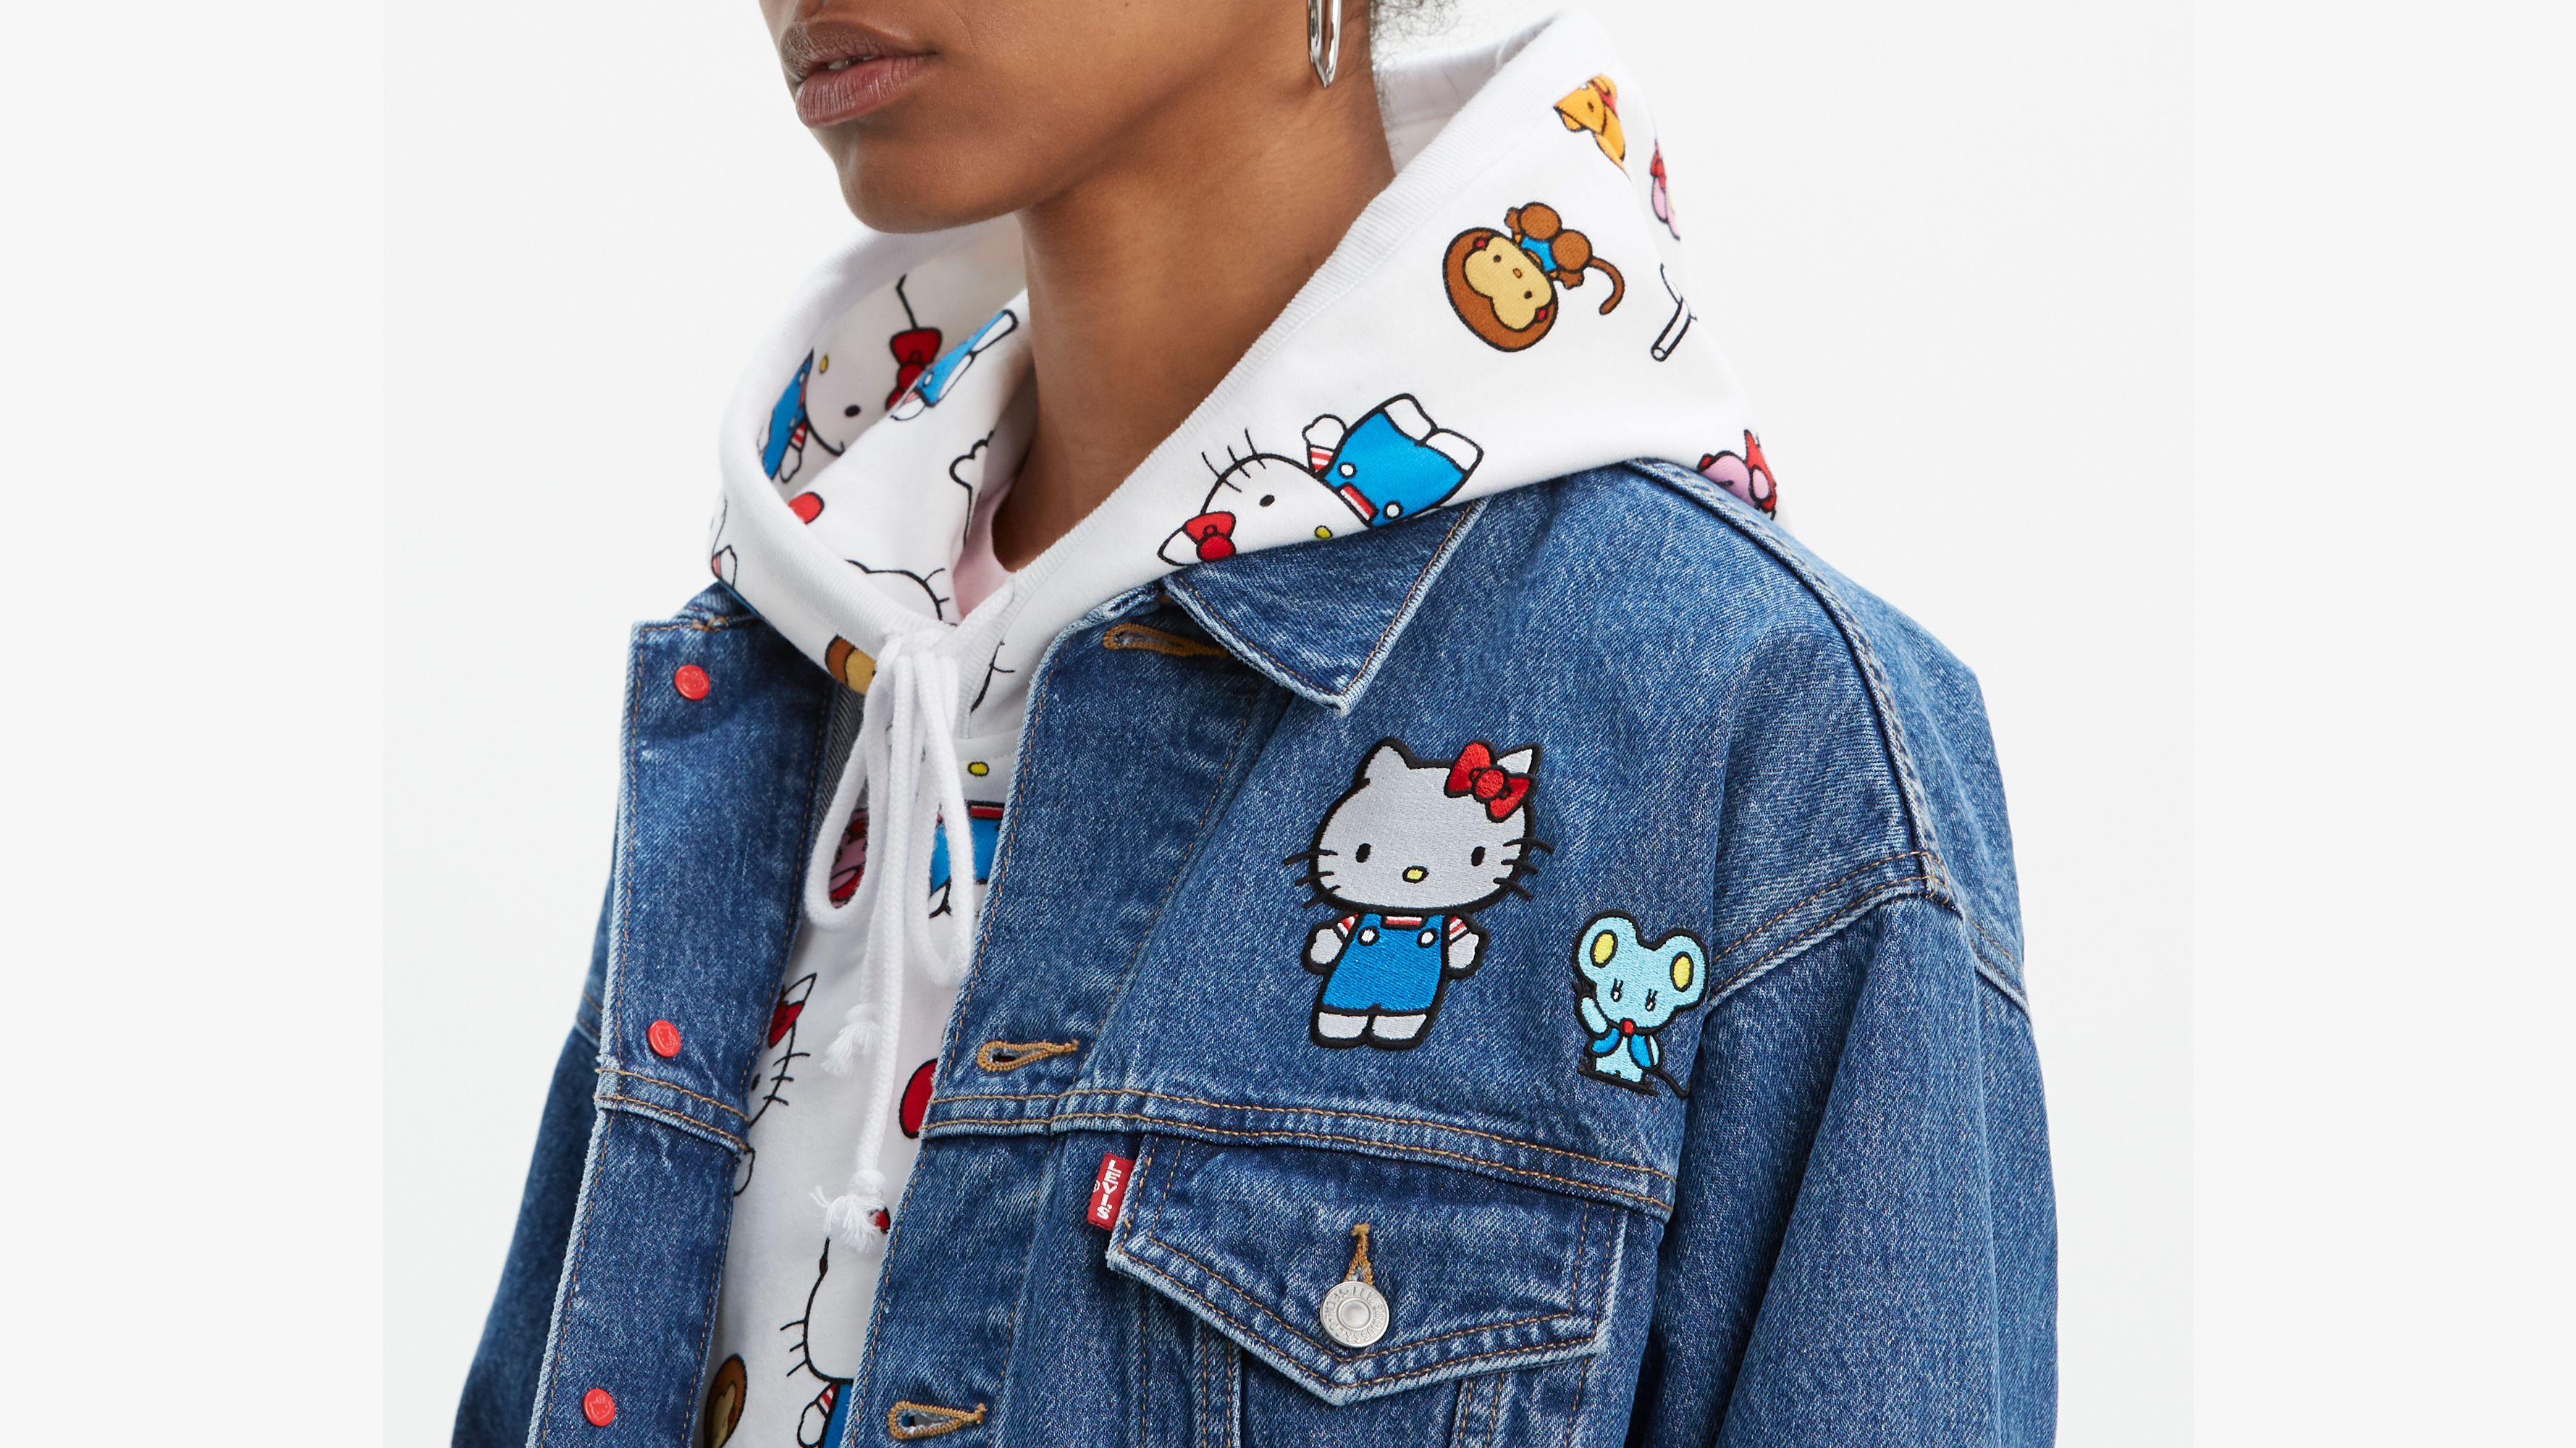 levi's hello kitty collection